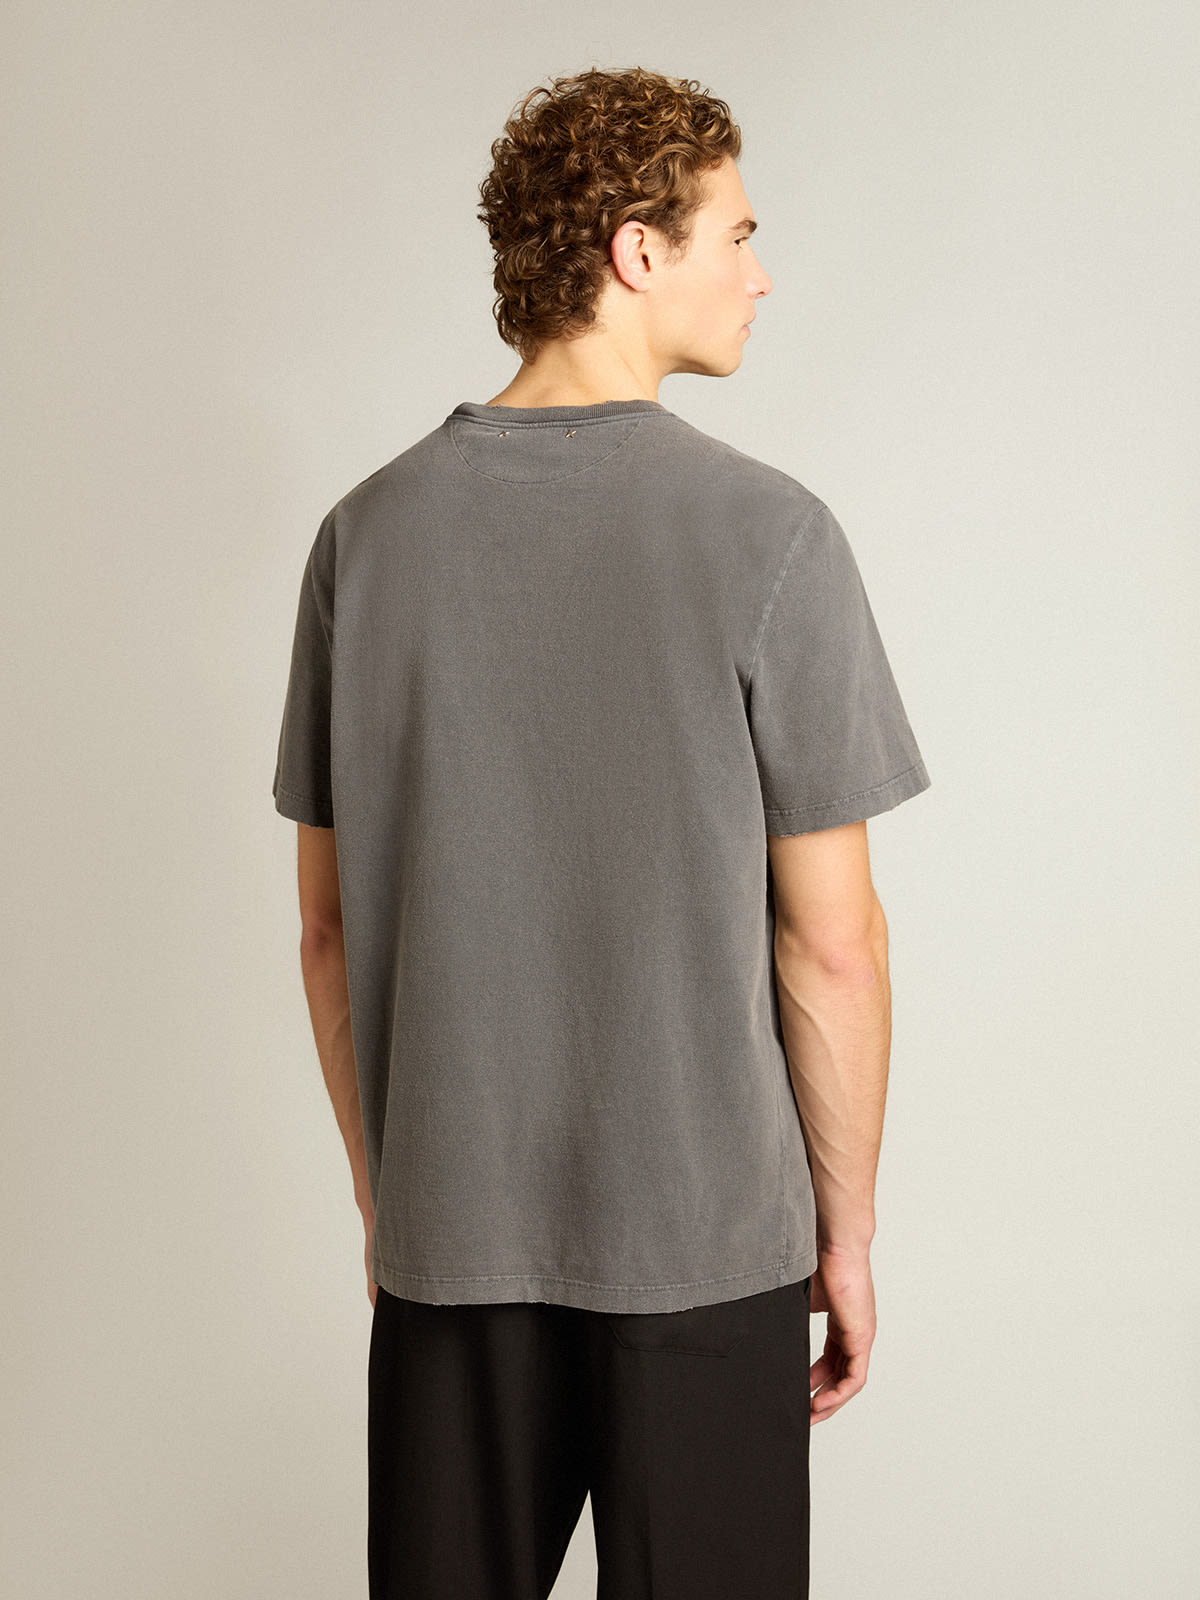 Golden Goose - Golden Collection T-shirt in anthracite gray with a distressed treatment in 